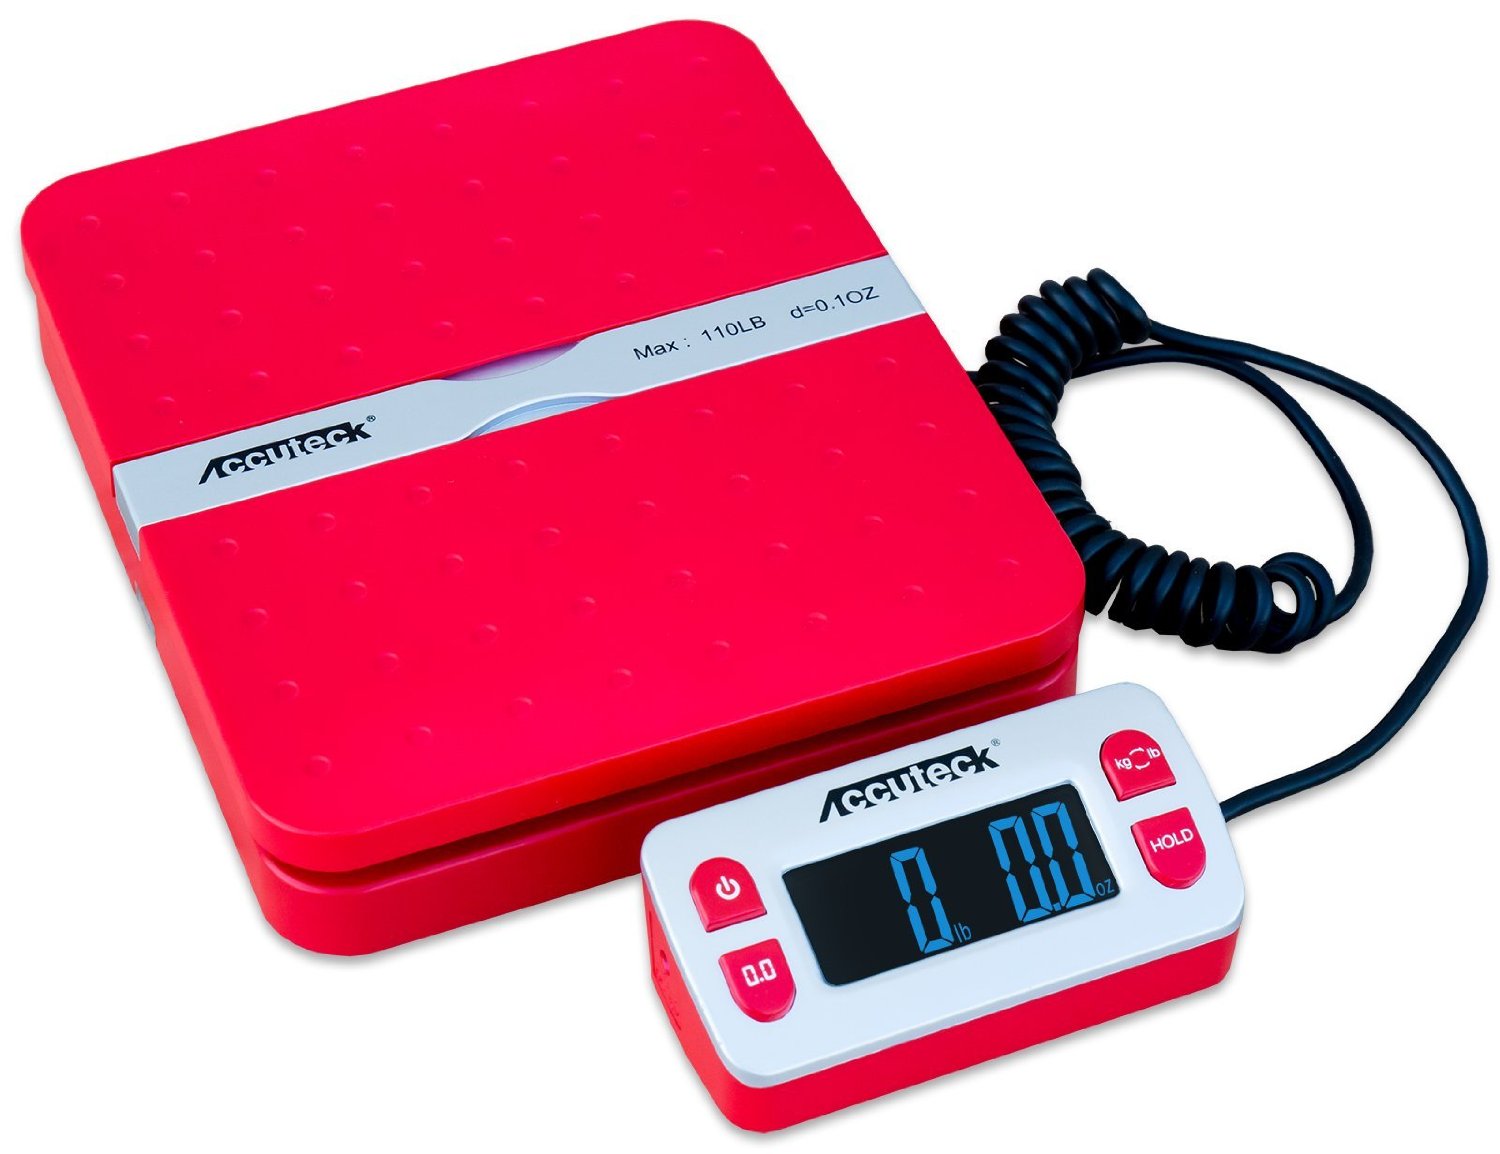 Accuteck ShipPro W-8580 110lbs x 0.1 oz Red Digital shipping postal scale, Limited Edition